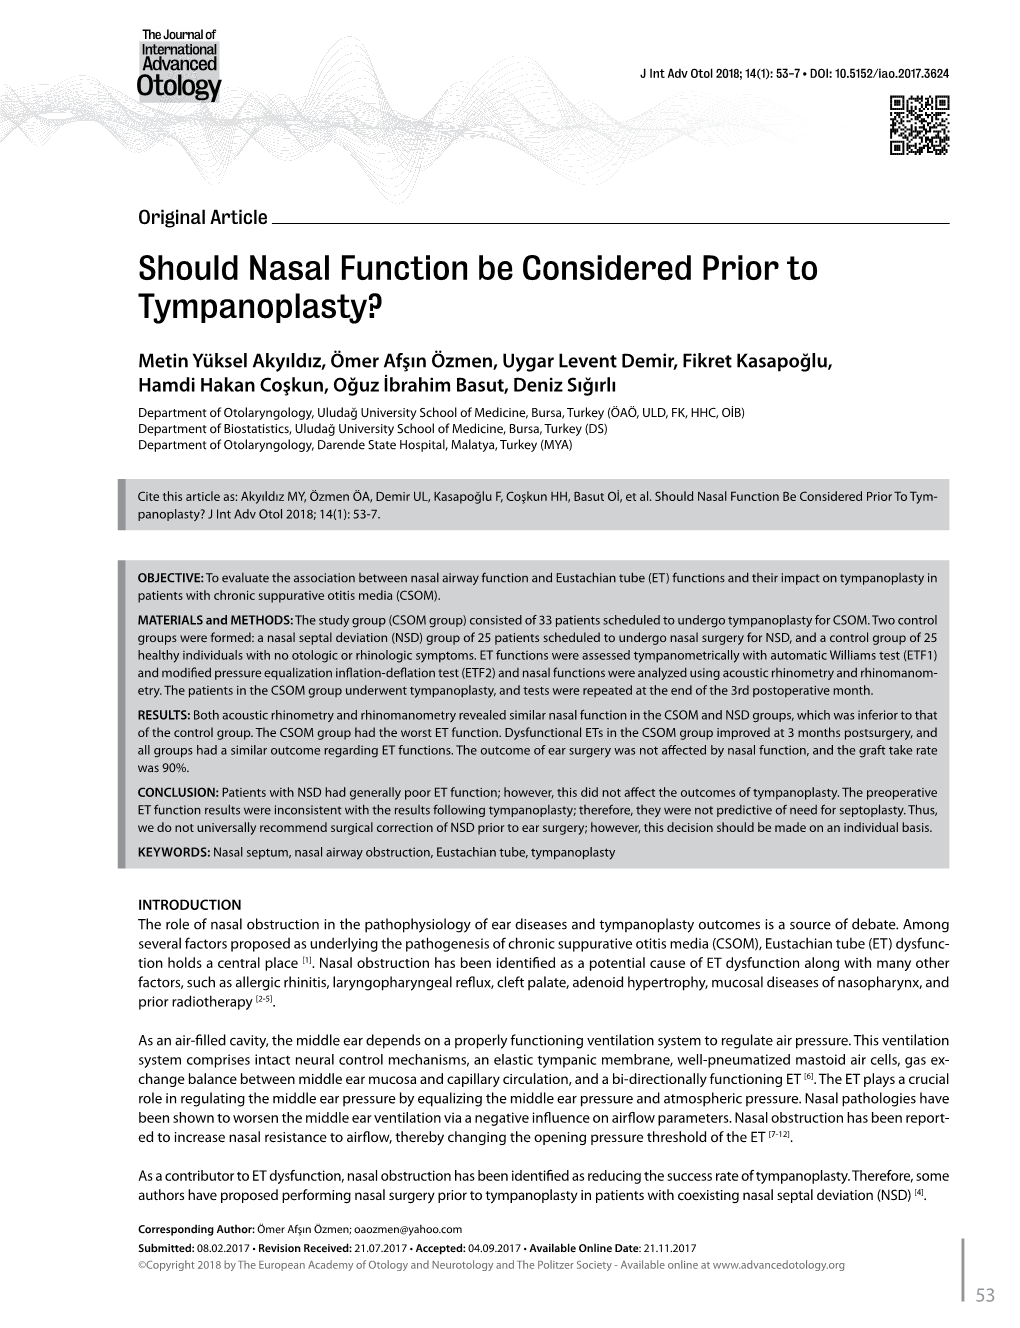 Should Nasal Function Be Considered Prior to Tympanoplasty?